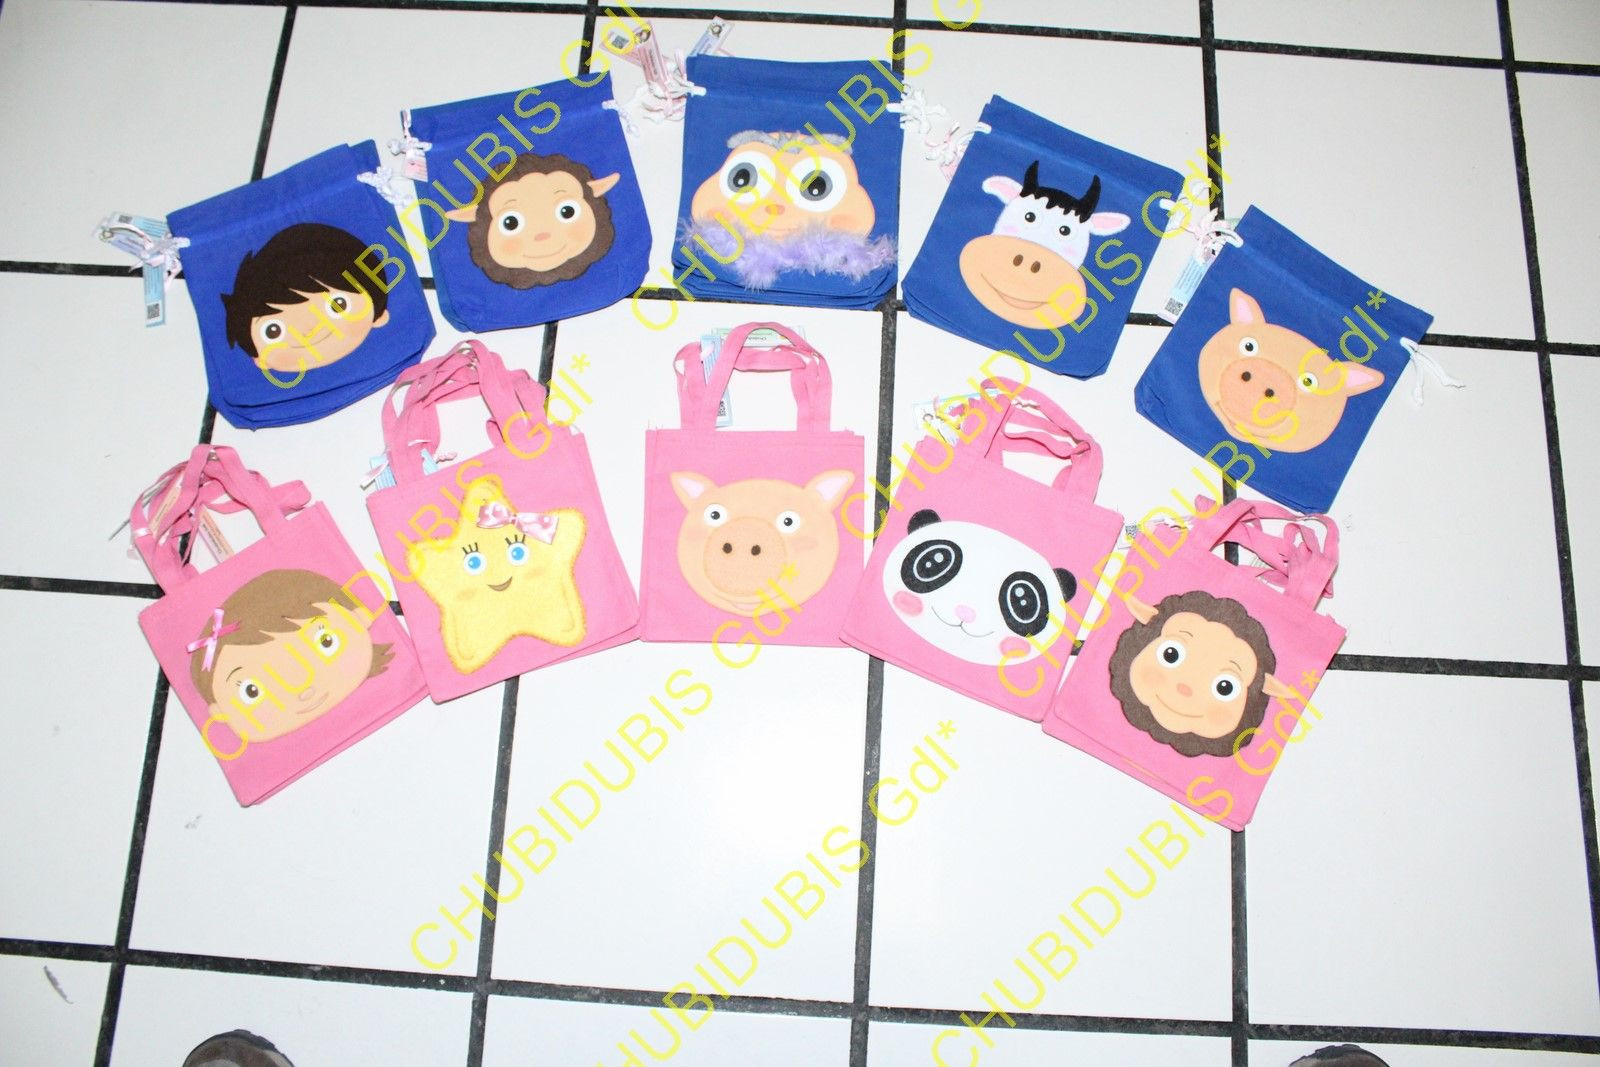 Little Baby Bum Themed Party
 Pin on Little Baby Bum Birthday Party